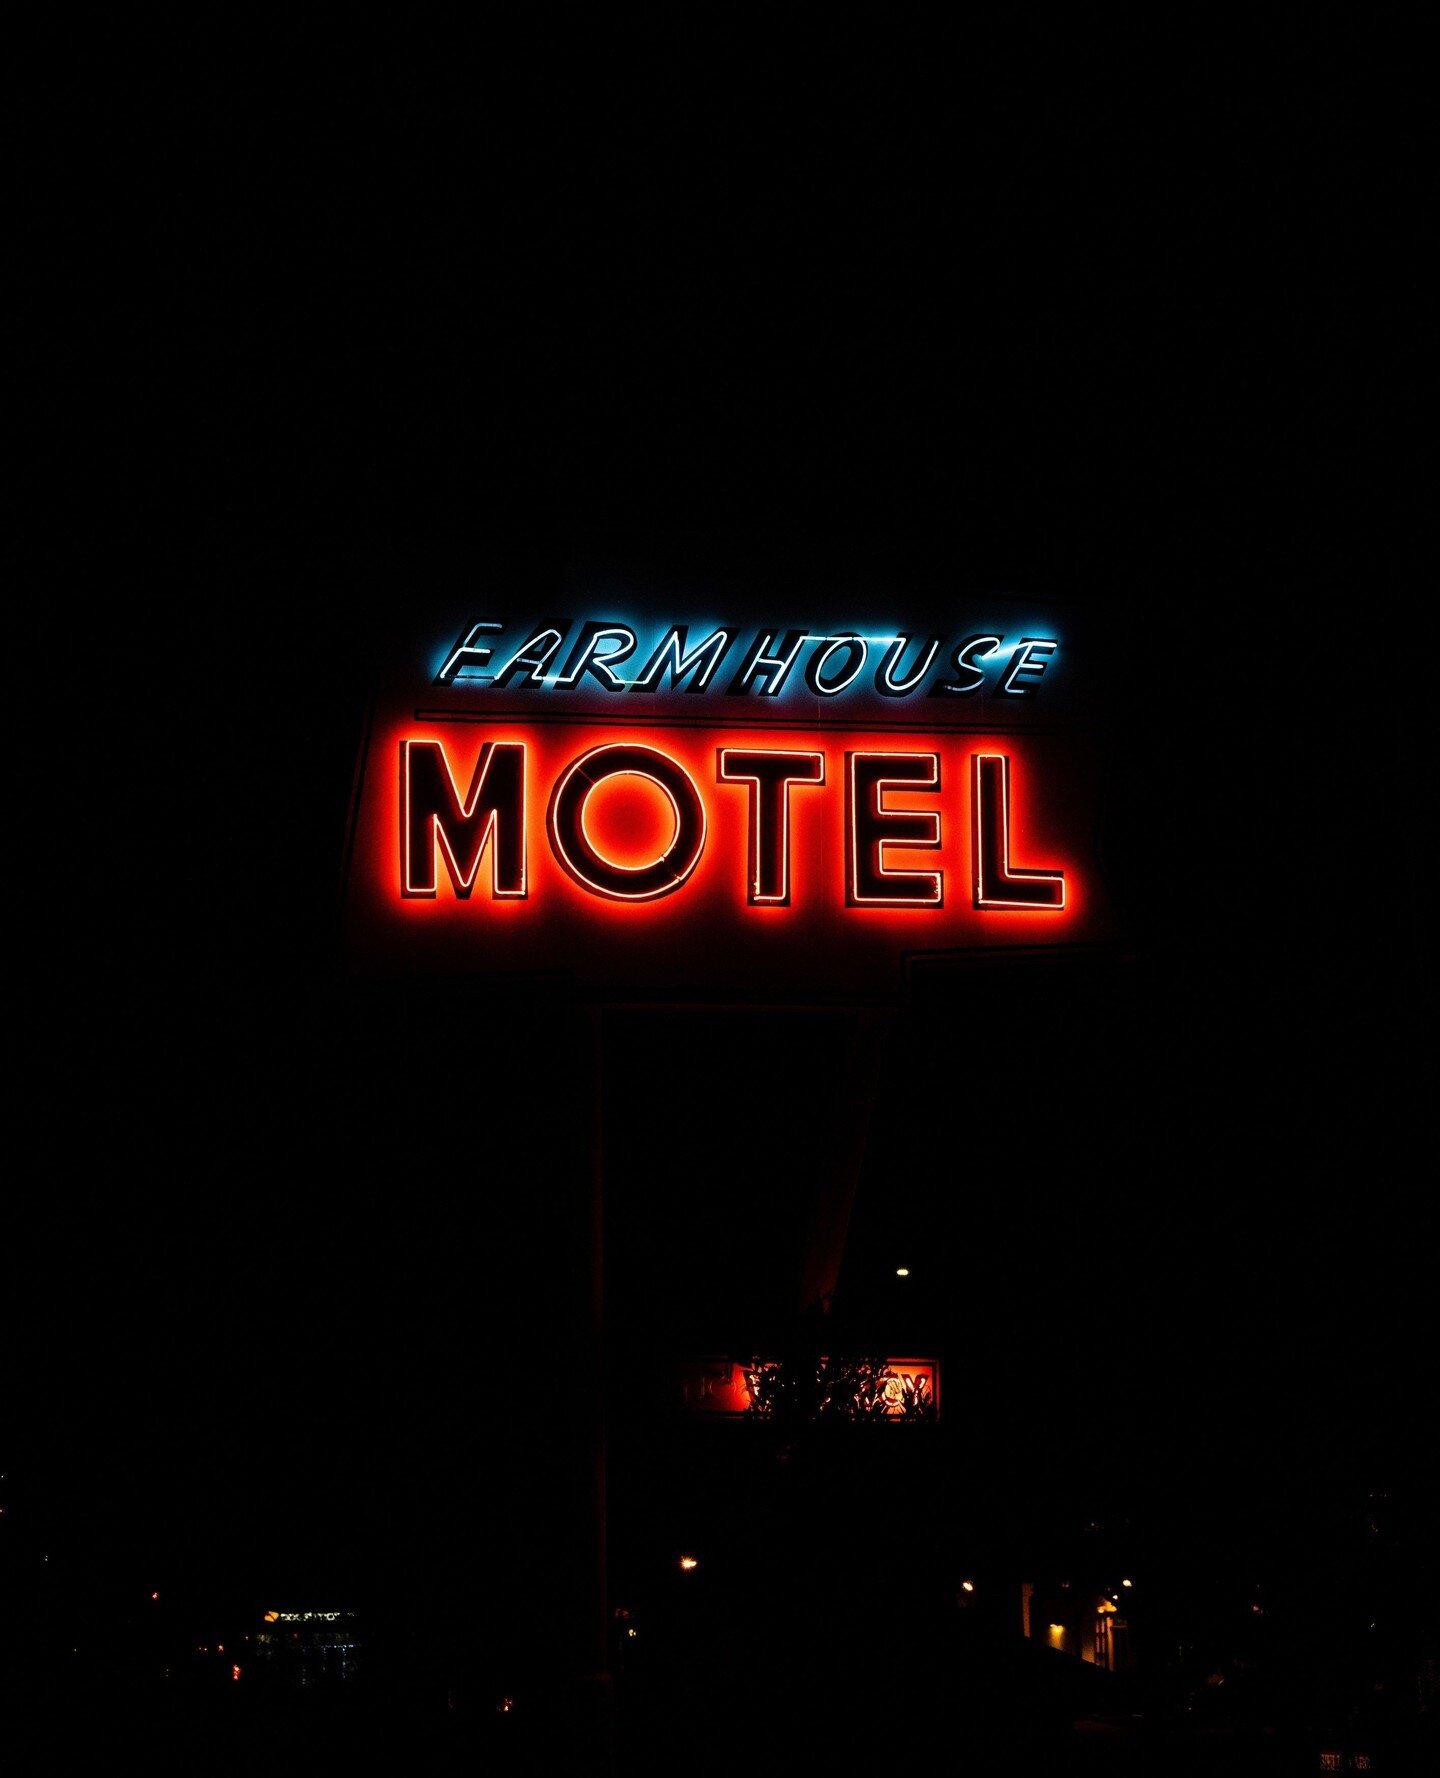 We know it, you know it, and @bostonglobe knows it: MOTELS ARE BACK ⁠🗣️⁠
⁠
Journalist Jon Marcus chatted with moteliers across the country (including our own @kimberly.a.walker) about the revival:::⁠
⁠
🗯️ &quot;Often dating from before the intersta